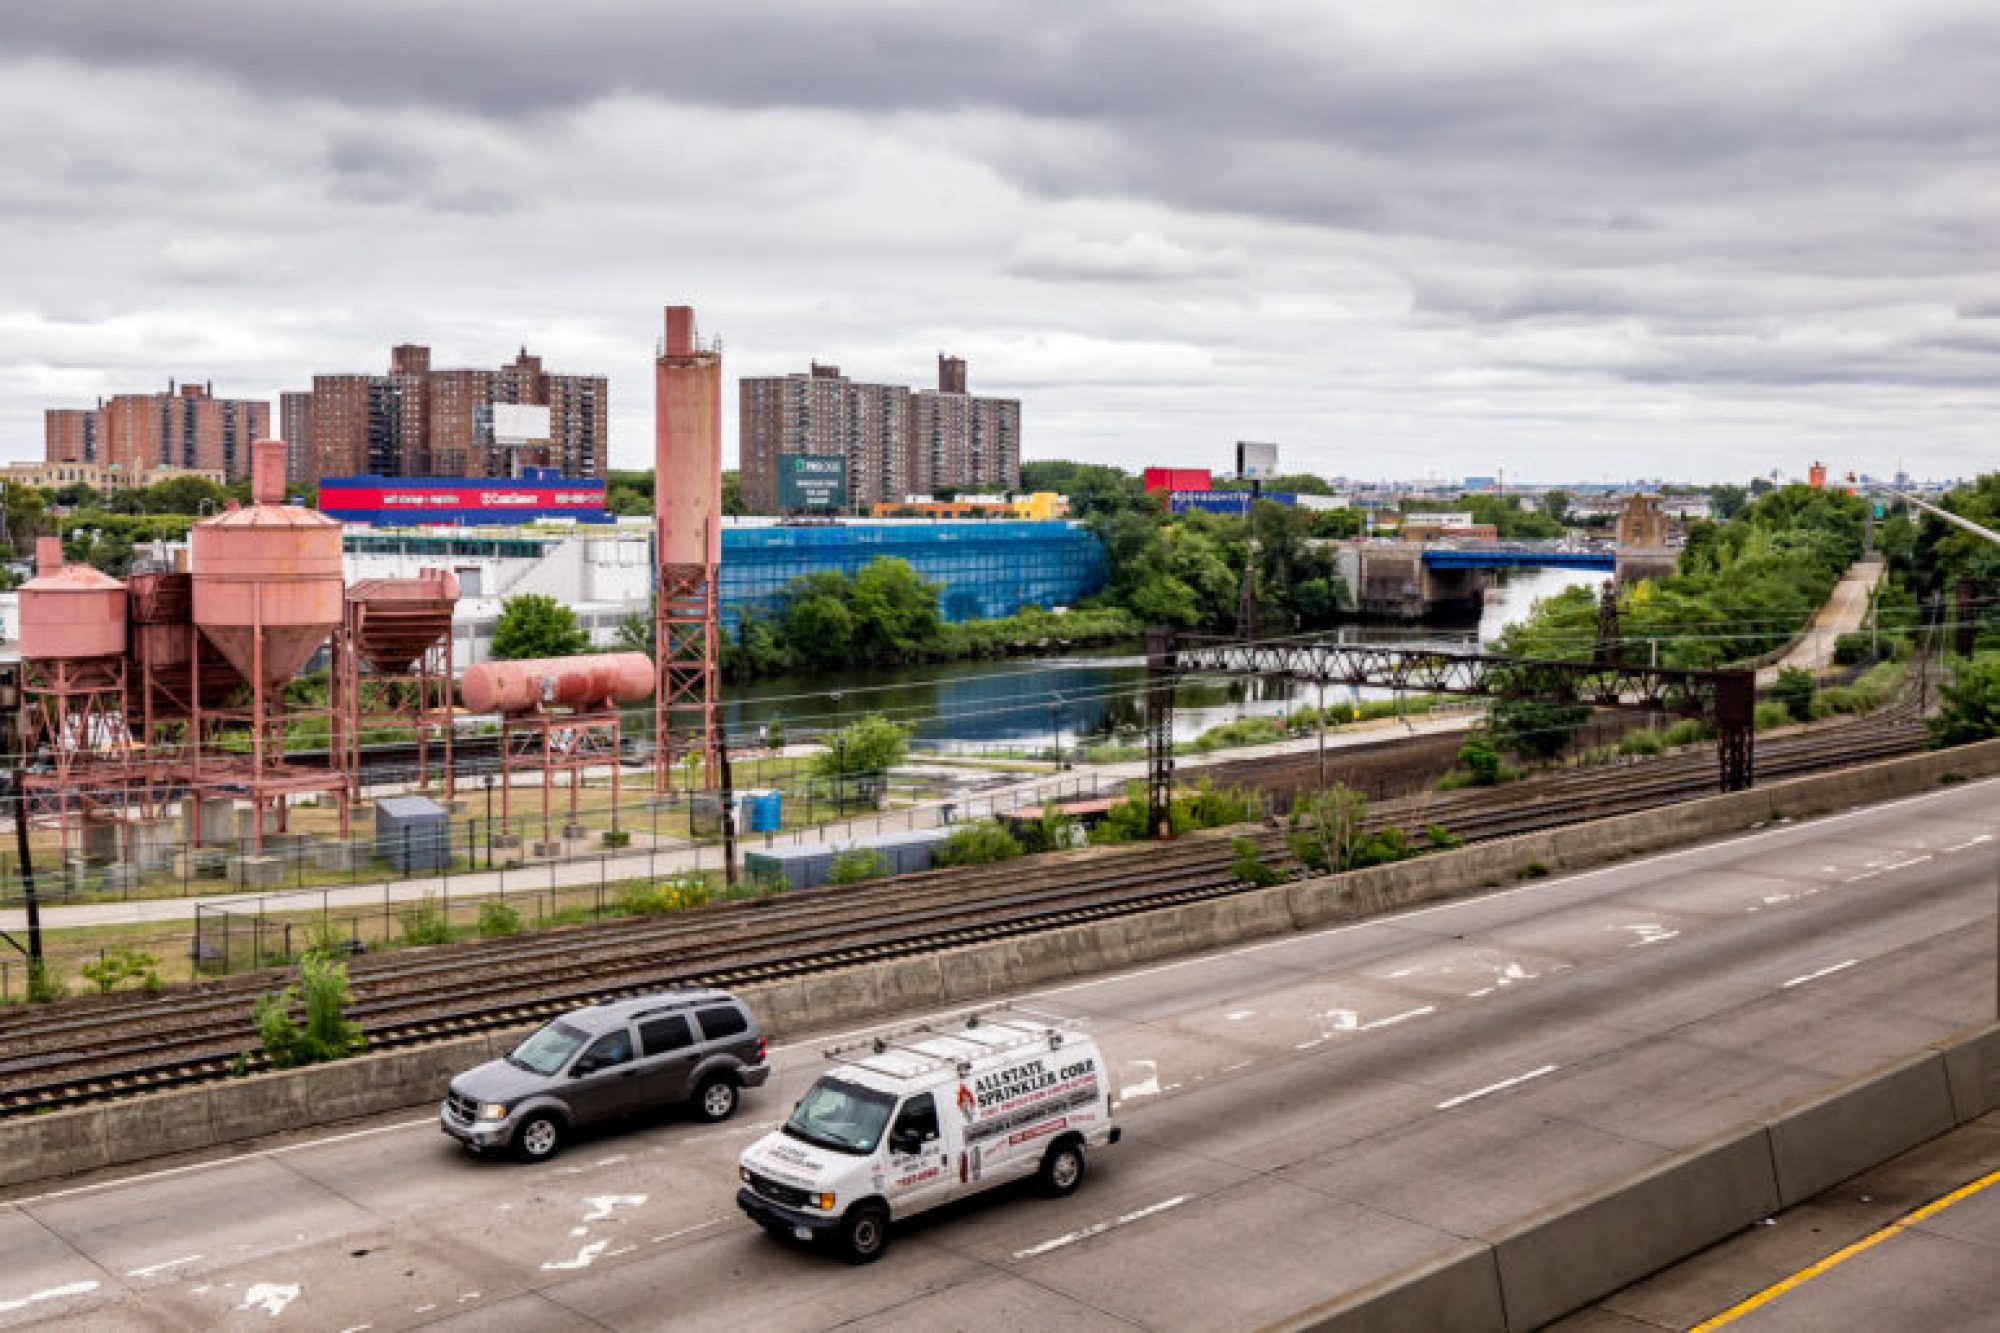 Monday July 24: Looking South East from From the Whitlock Avenue 6 train station in the Bronx at the Sheridan Expressway, freight train tracks, Concrete Plant Park, Bronx River, warehouses and Lafayette Boynton Housing Corporation to name a few.